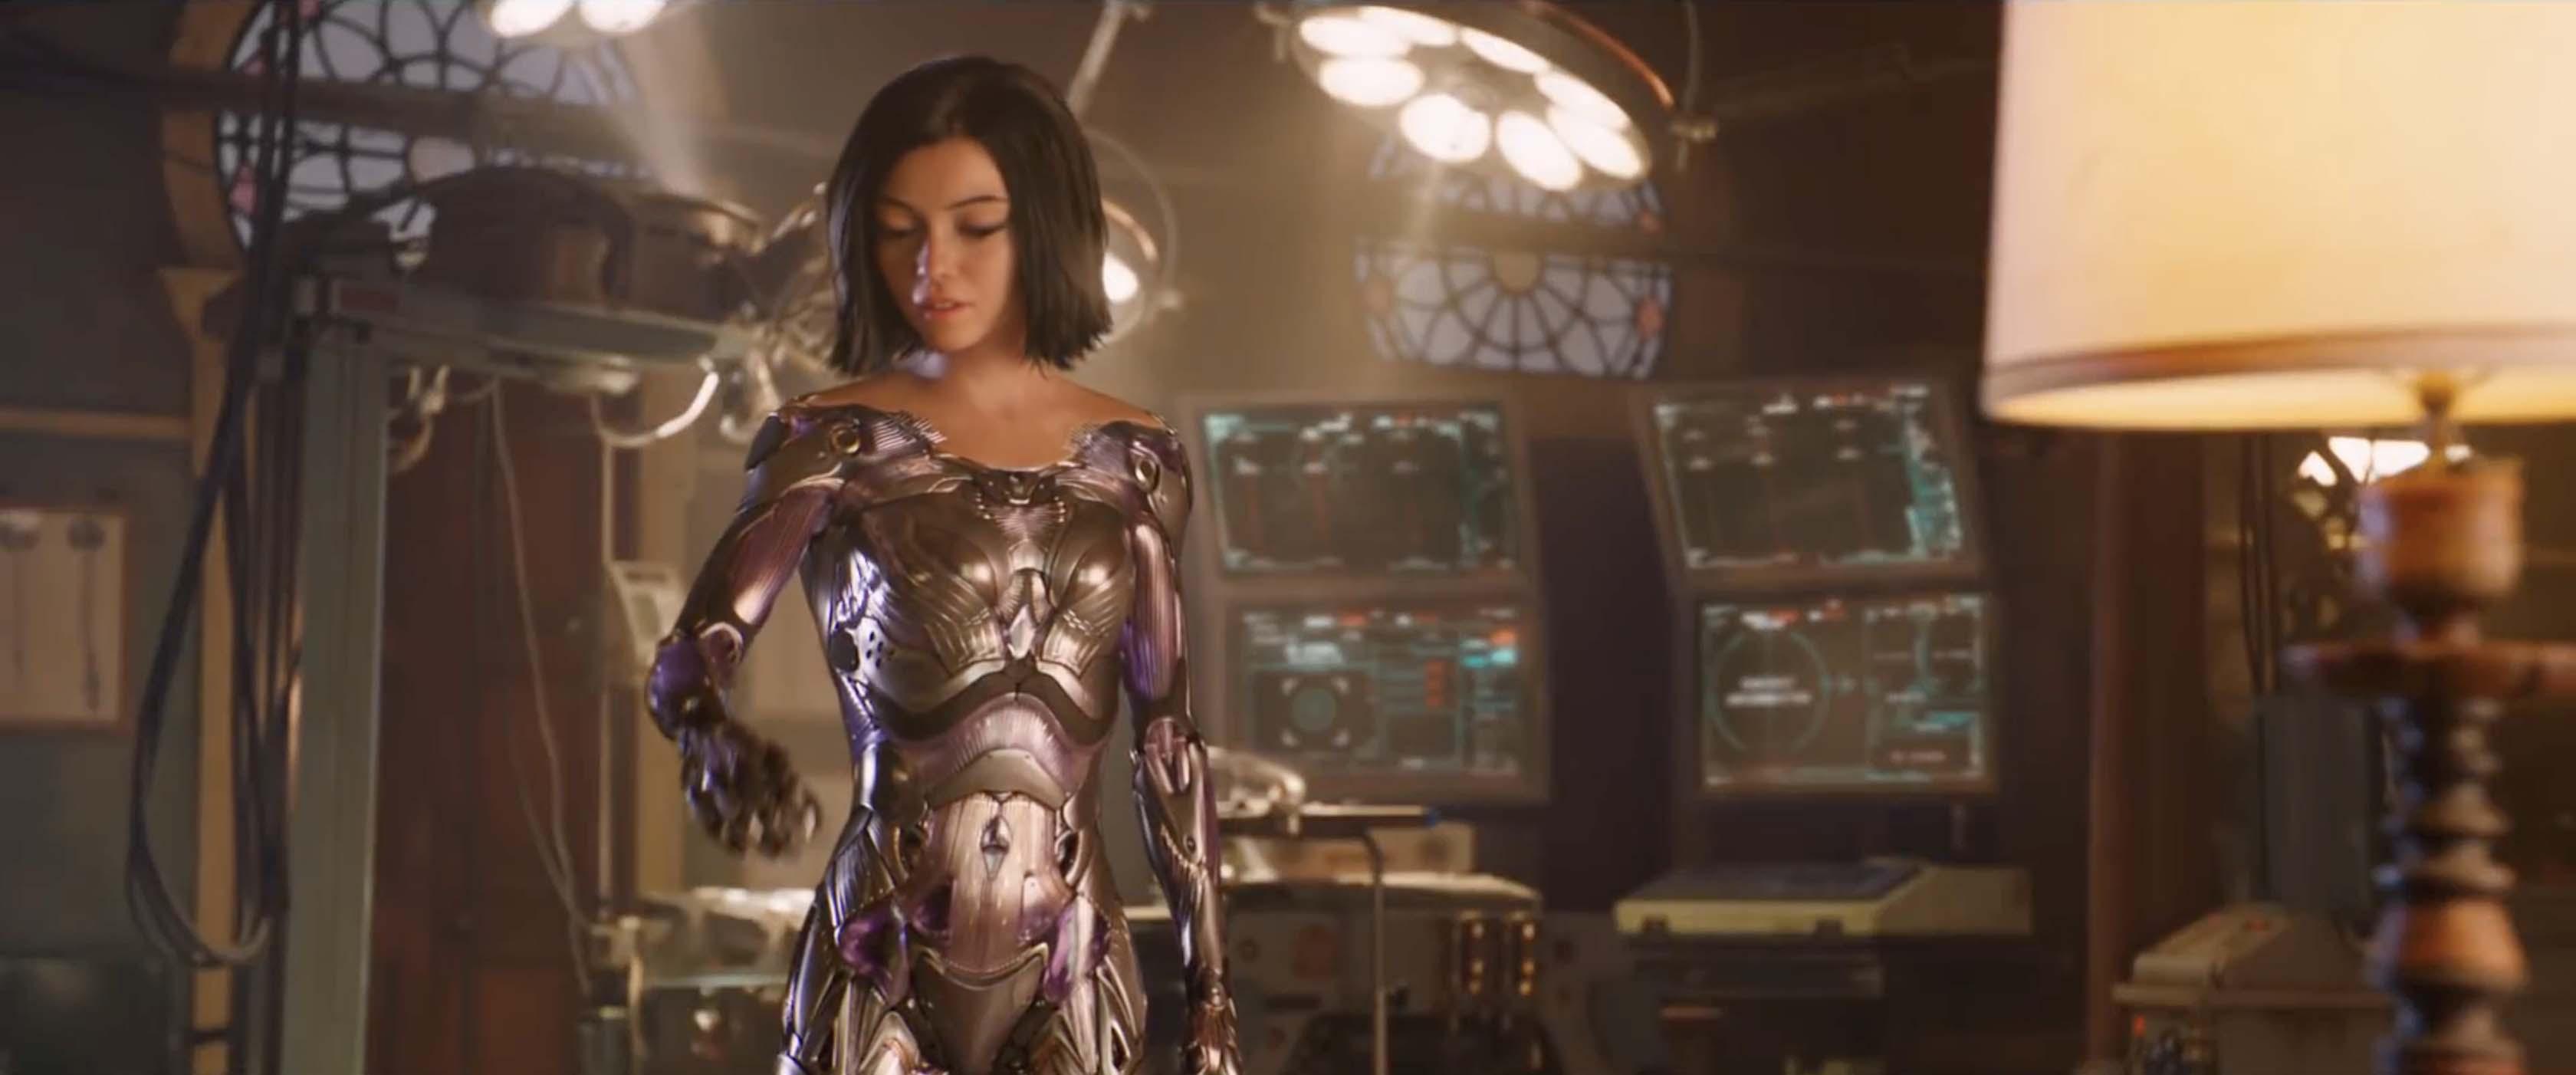 Alita: Battle Angel Review - Not As Crappy As the Trailer Makes It